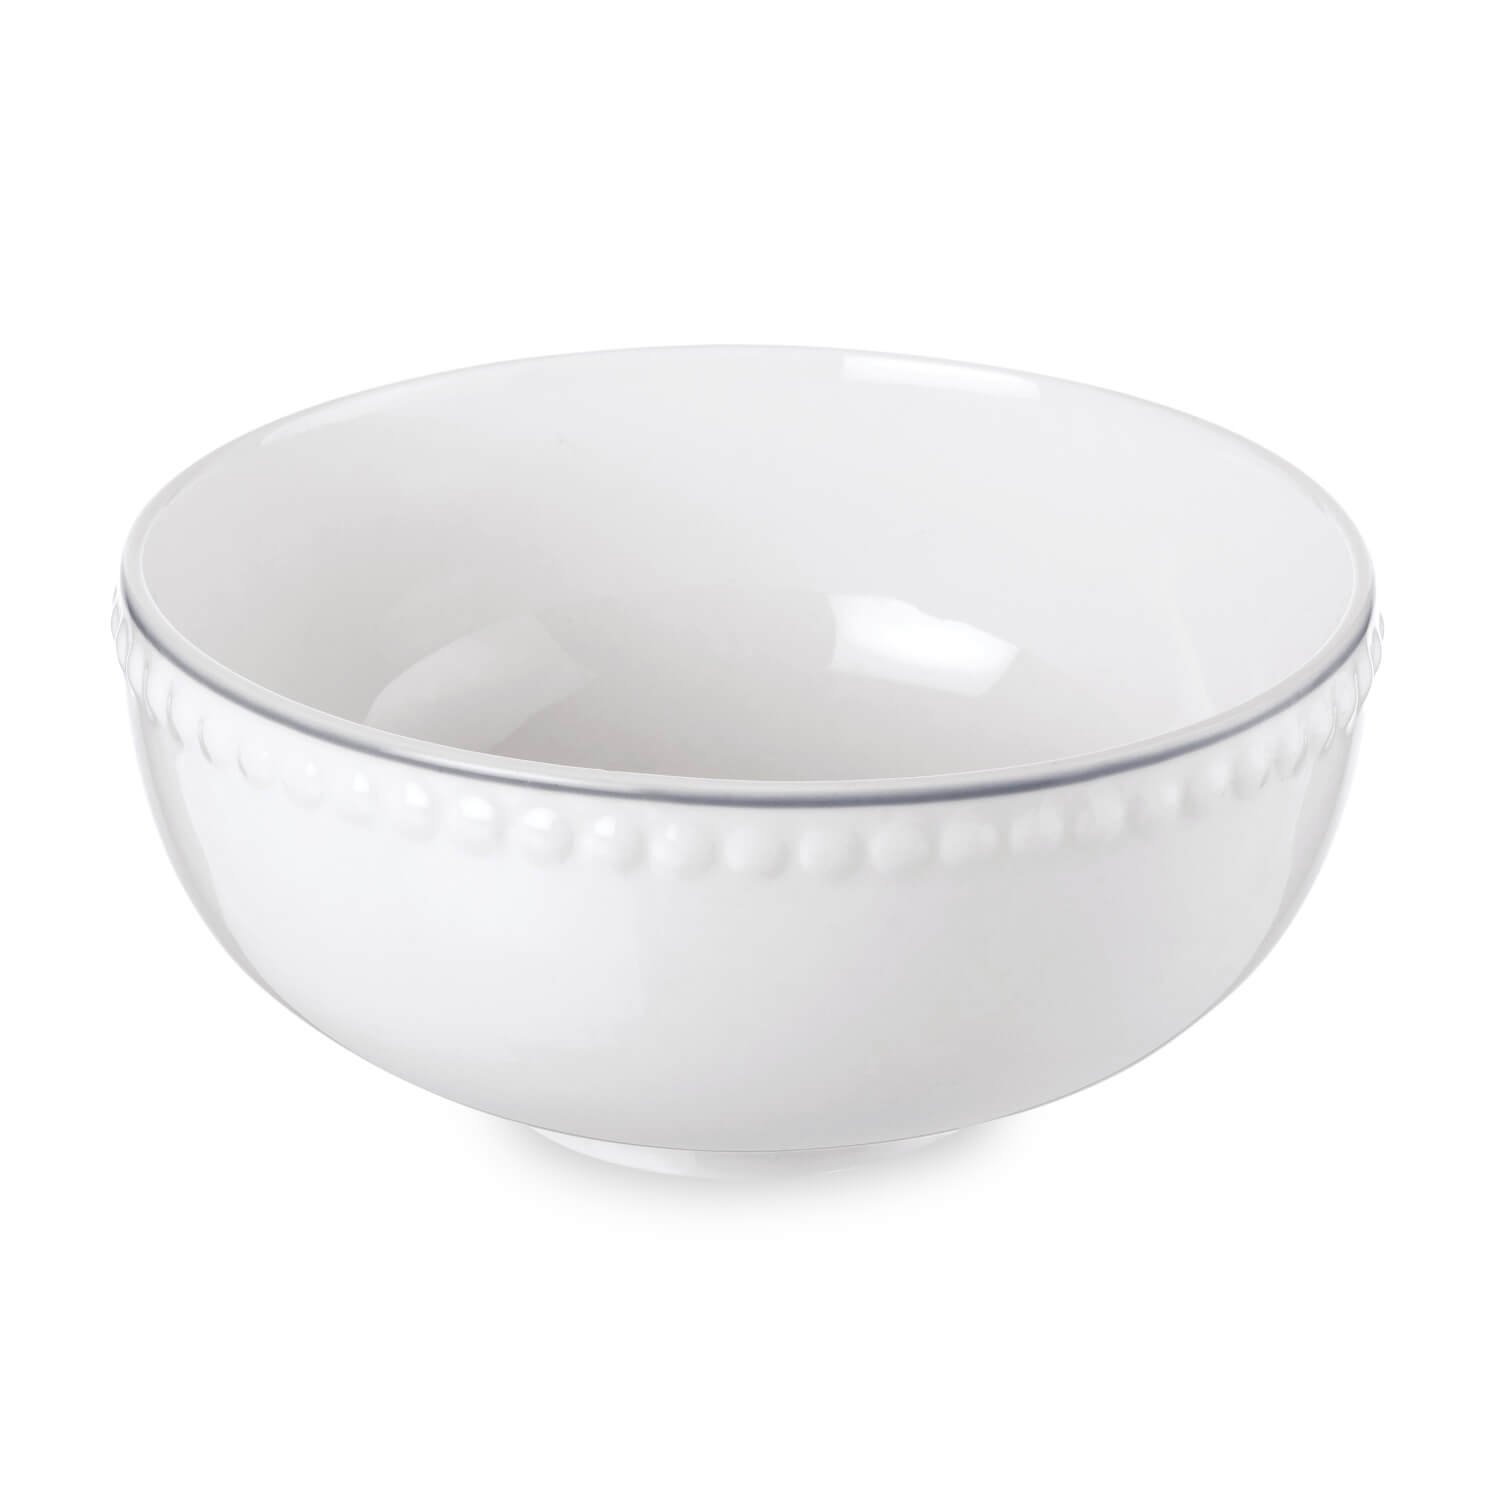 Mary Berry SIGNATURE COLLECTION CEREAL BOWL 13cm